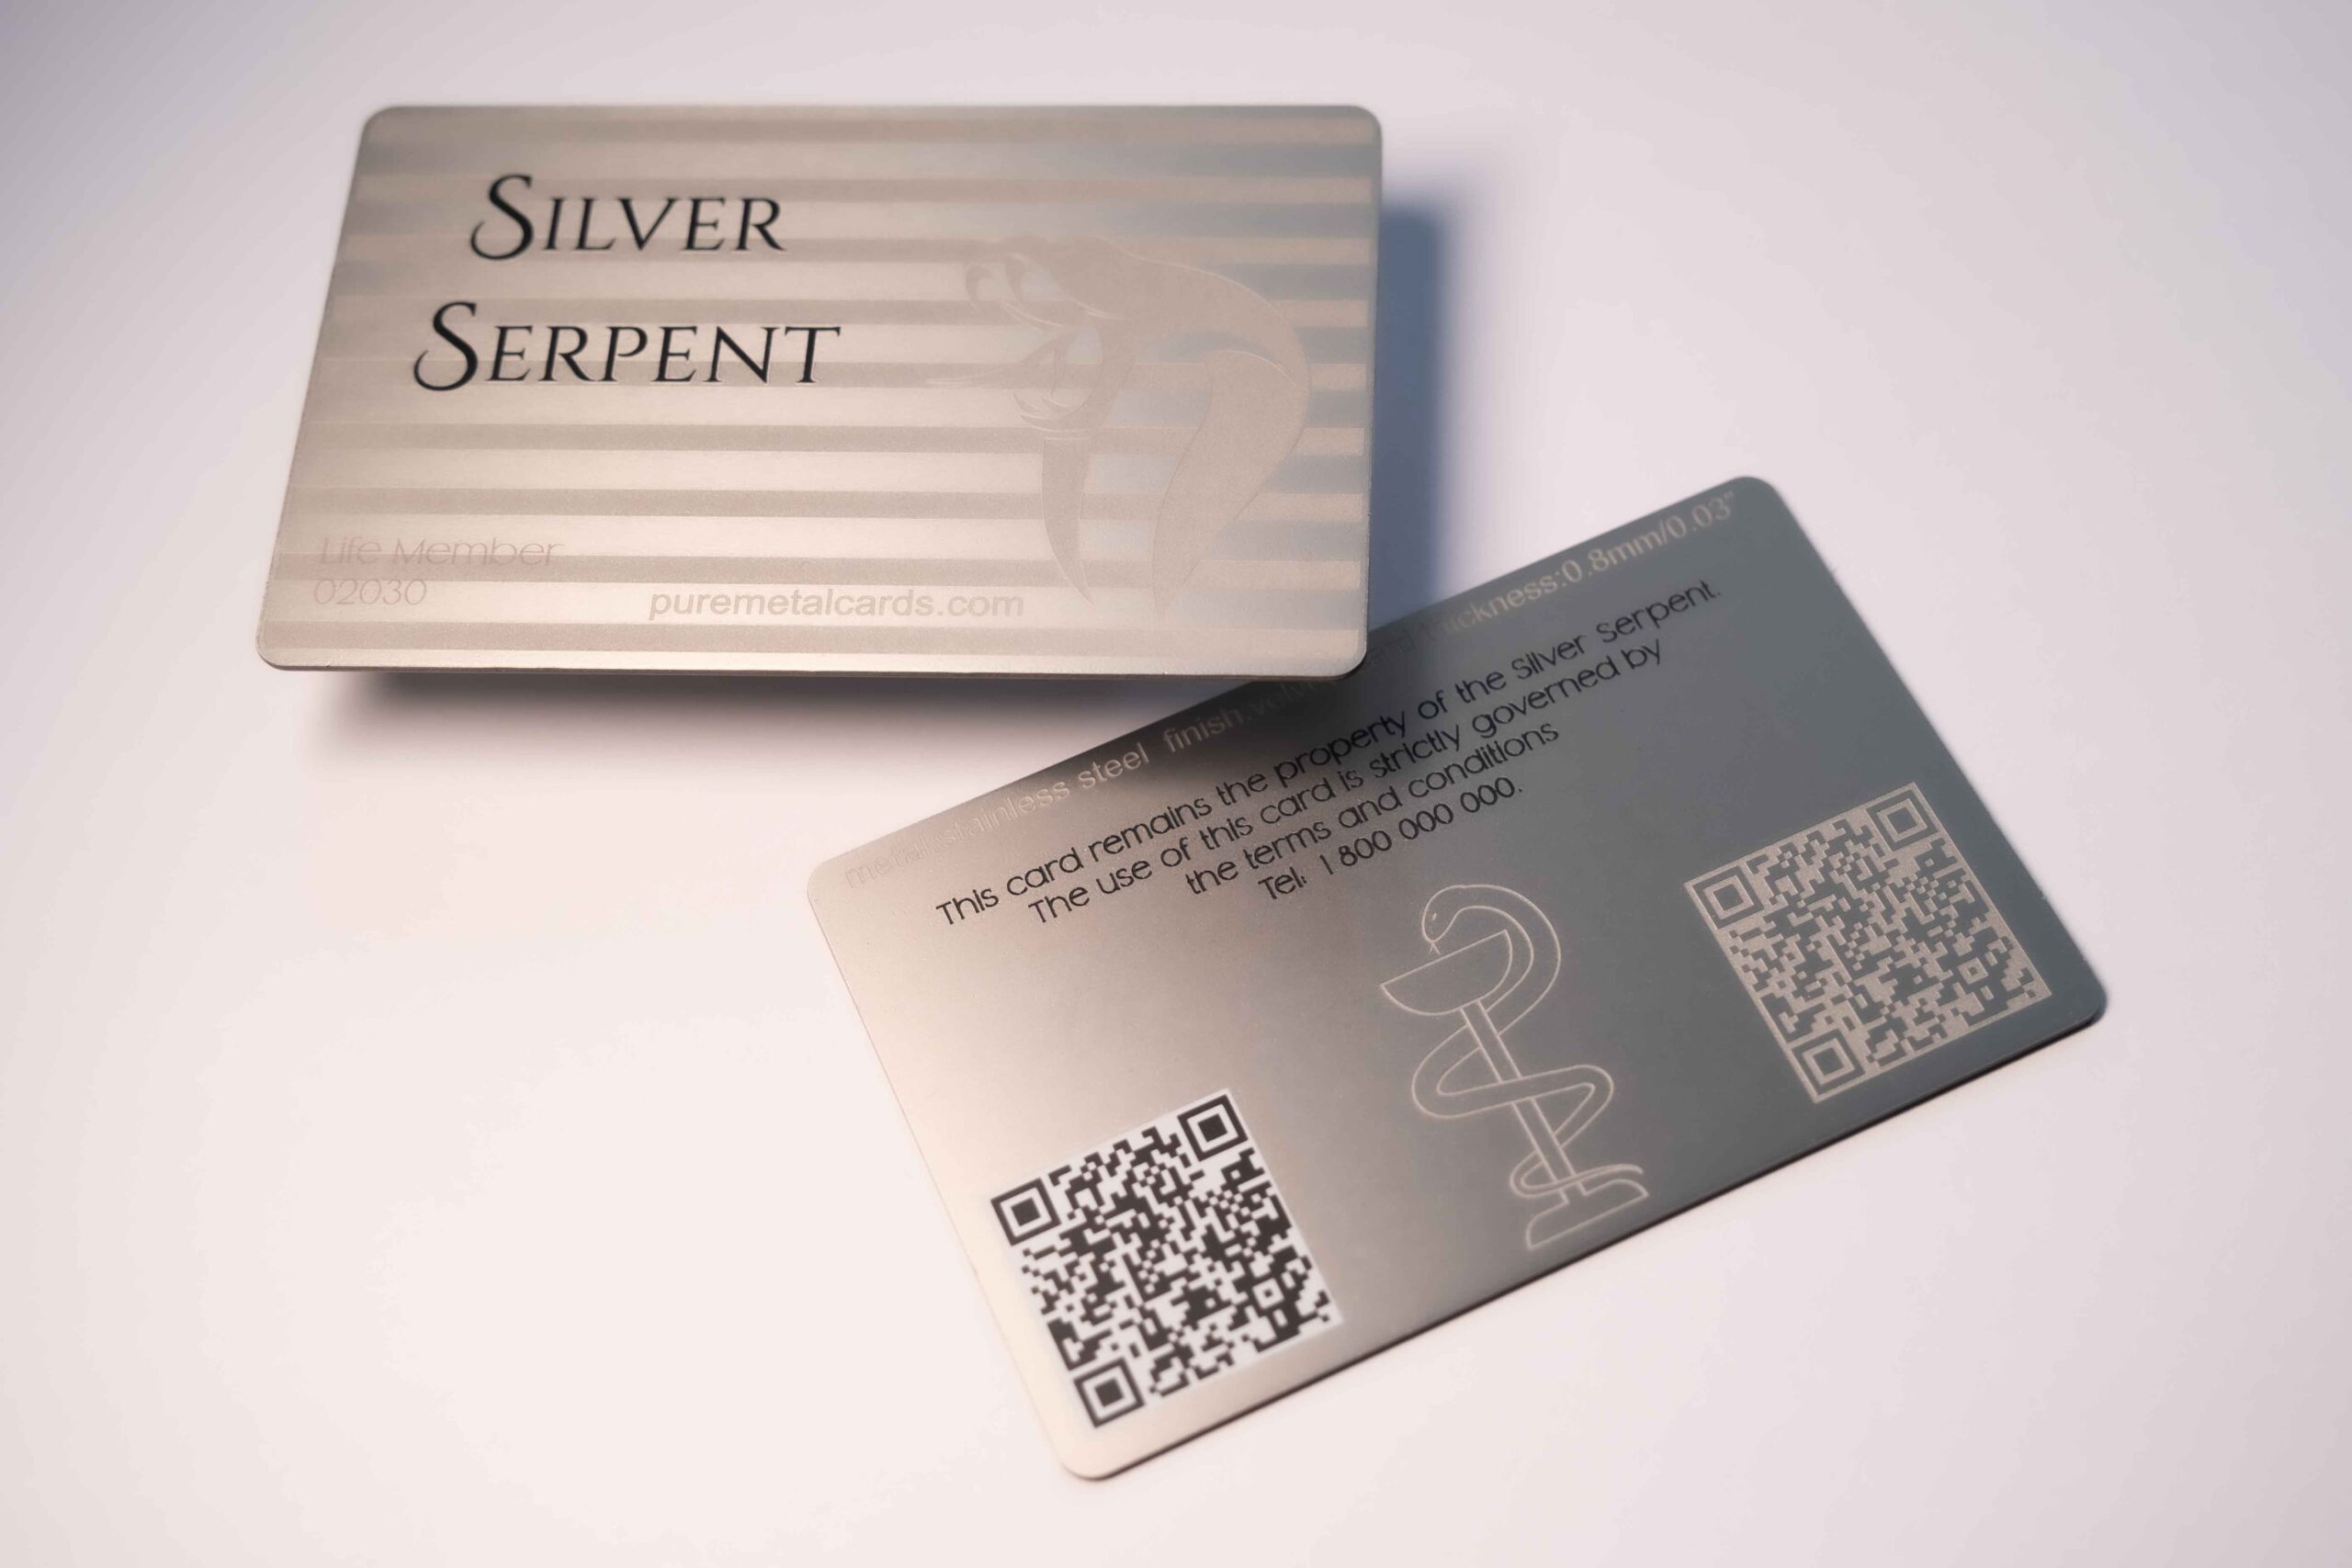 QR Codes Vs NFC Tags On Metal Business Cards - Metal Business Cards, My  Metal Business Card